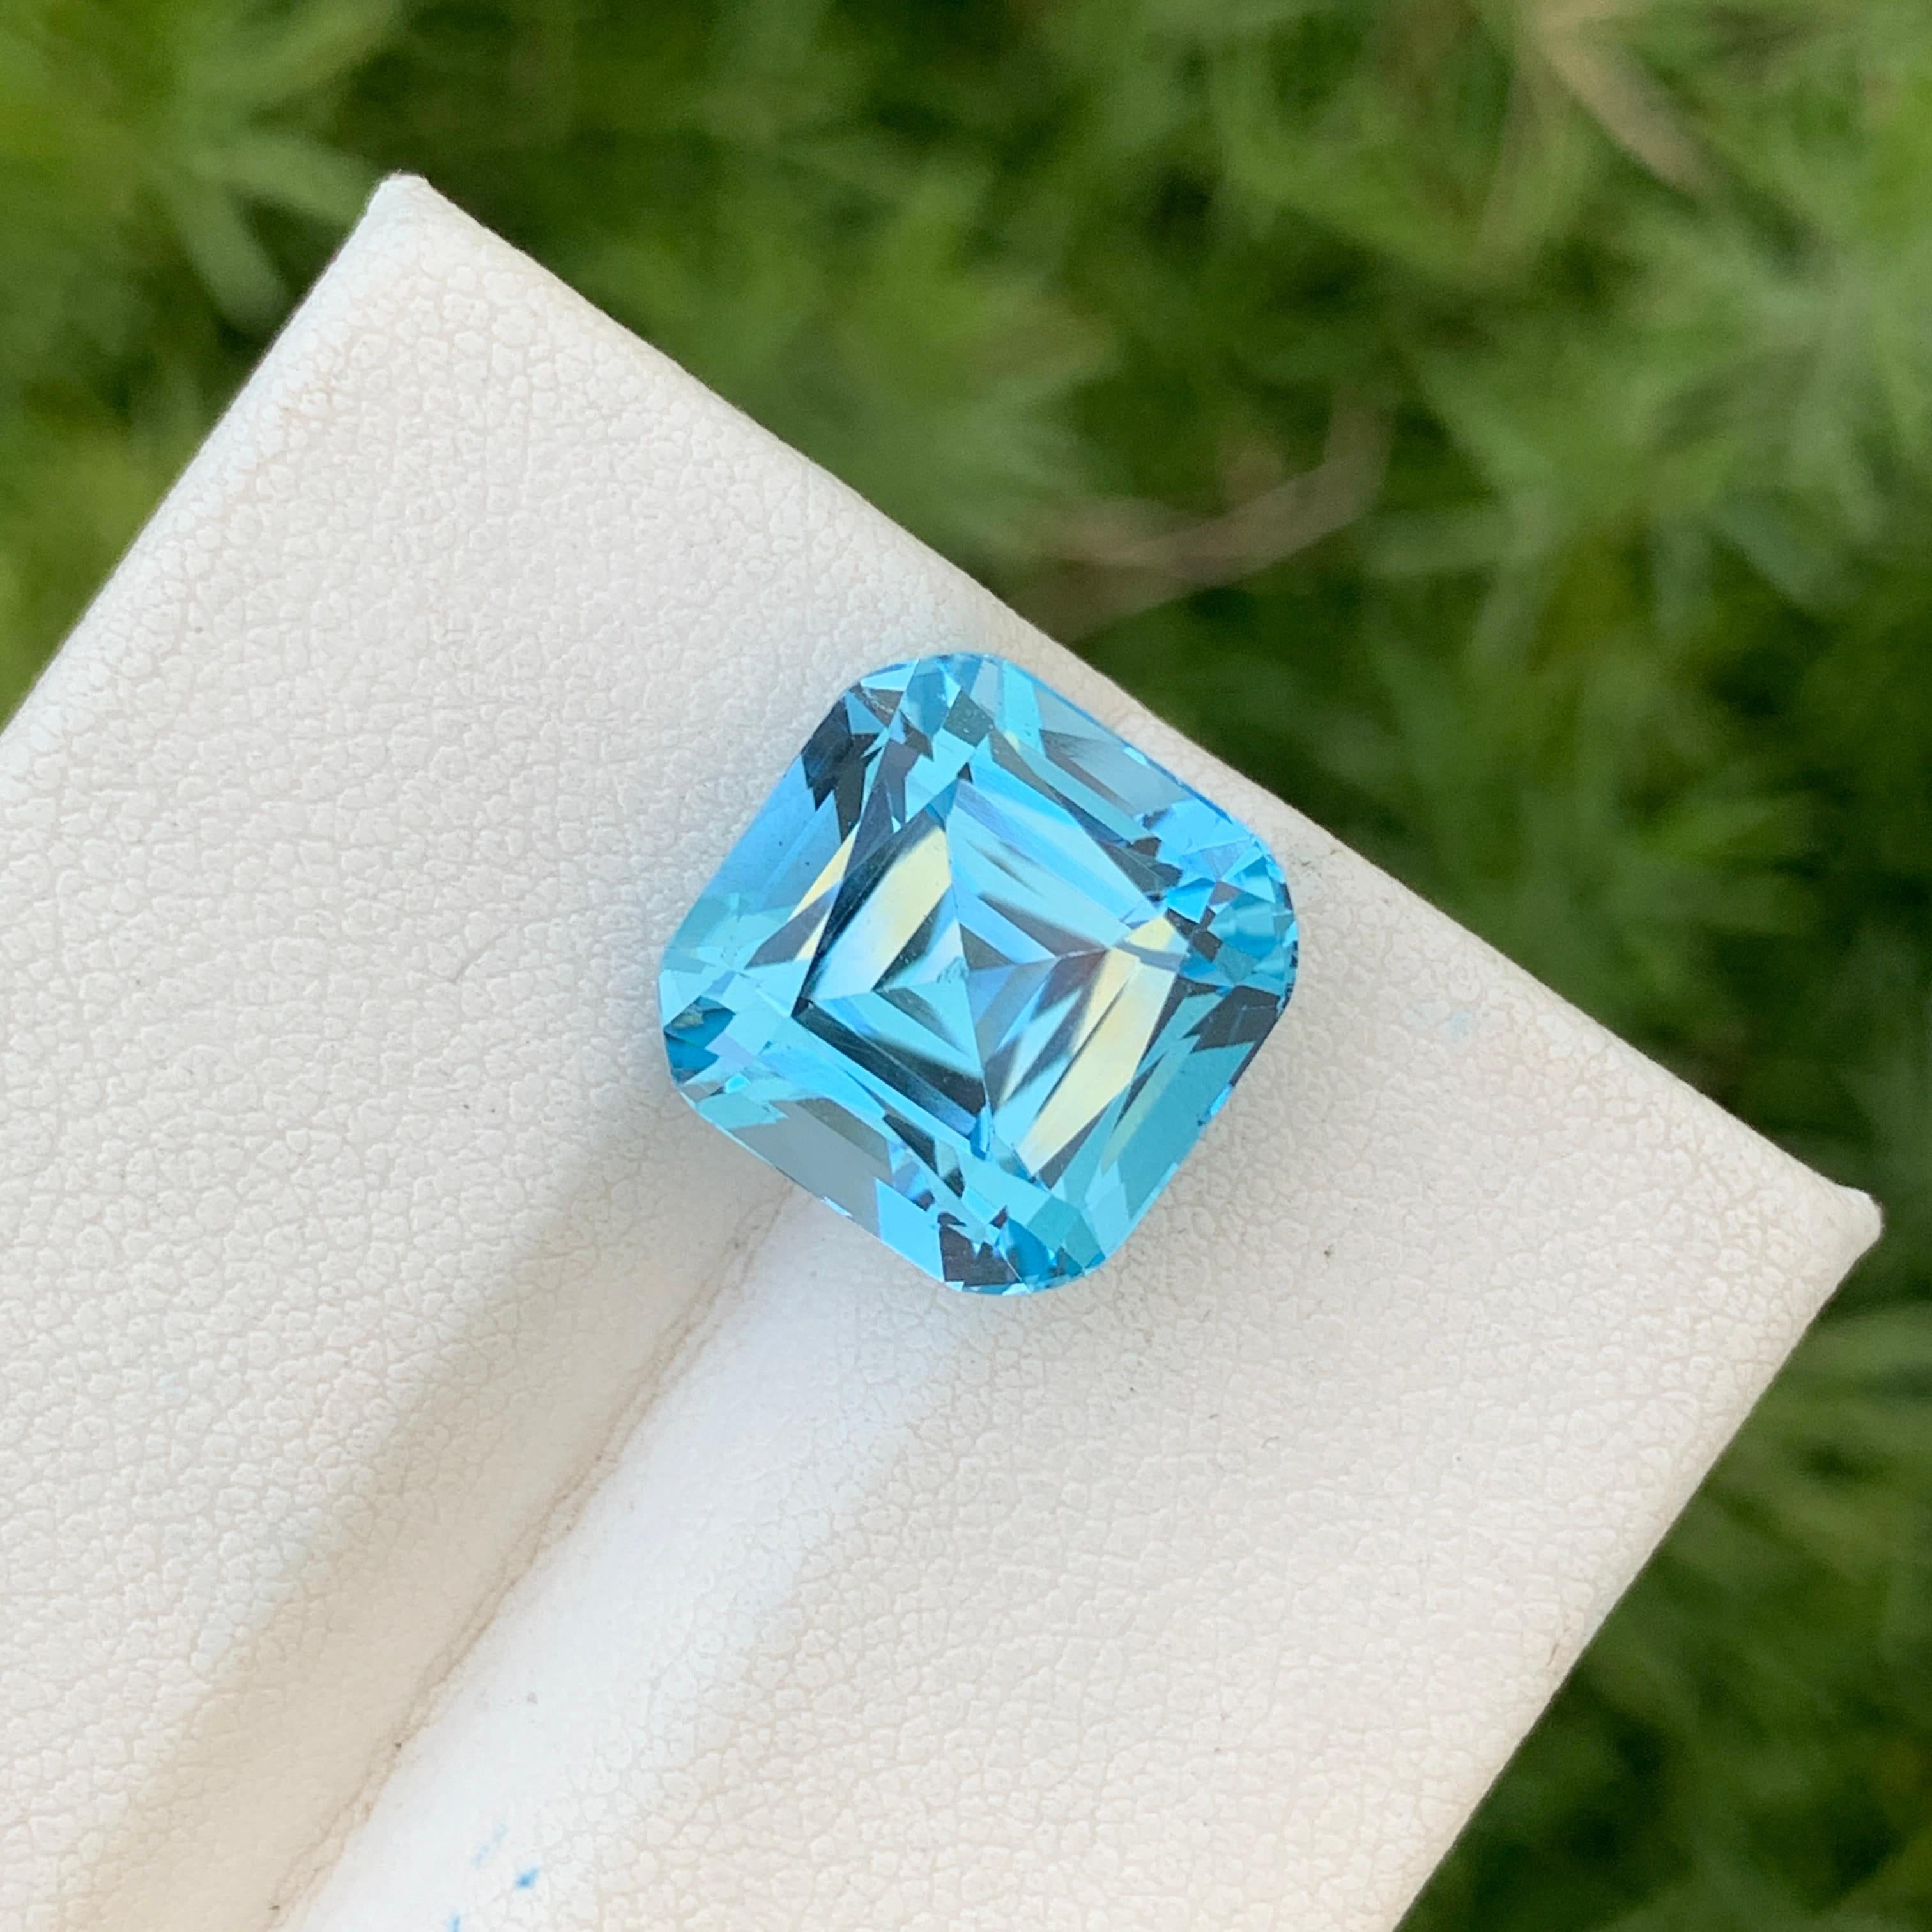 Loose Sky Blue Topaz
Weight: 12.60 Carats
Dimension: 12 x 12 x 9.6 Mm
Origin: Brazil
Colour: Sky Blue
Certificate: On Demand
Shape: Square 

Blue topaz is a stunning gemstone prized for its vibrant blue color and remarkable clarity. It belongs to